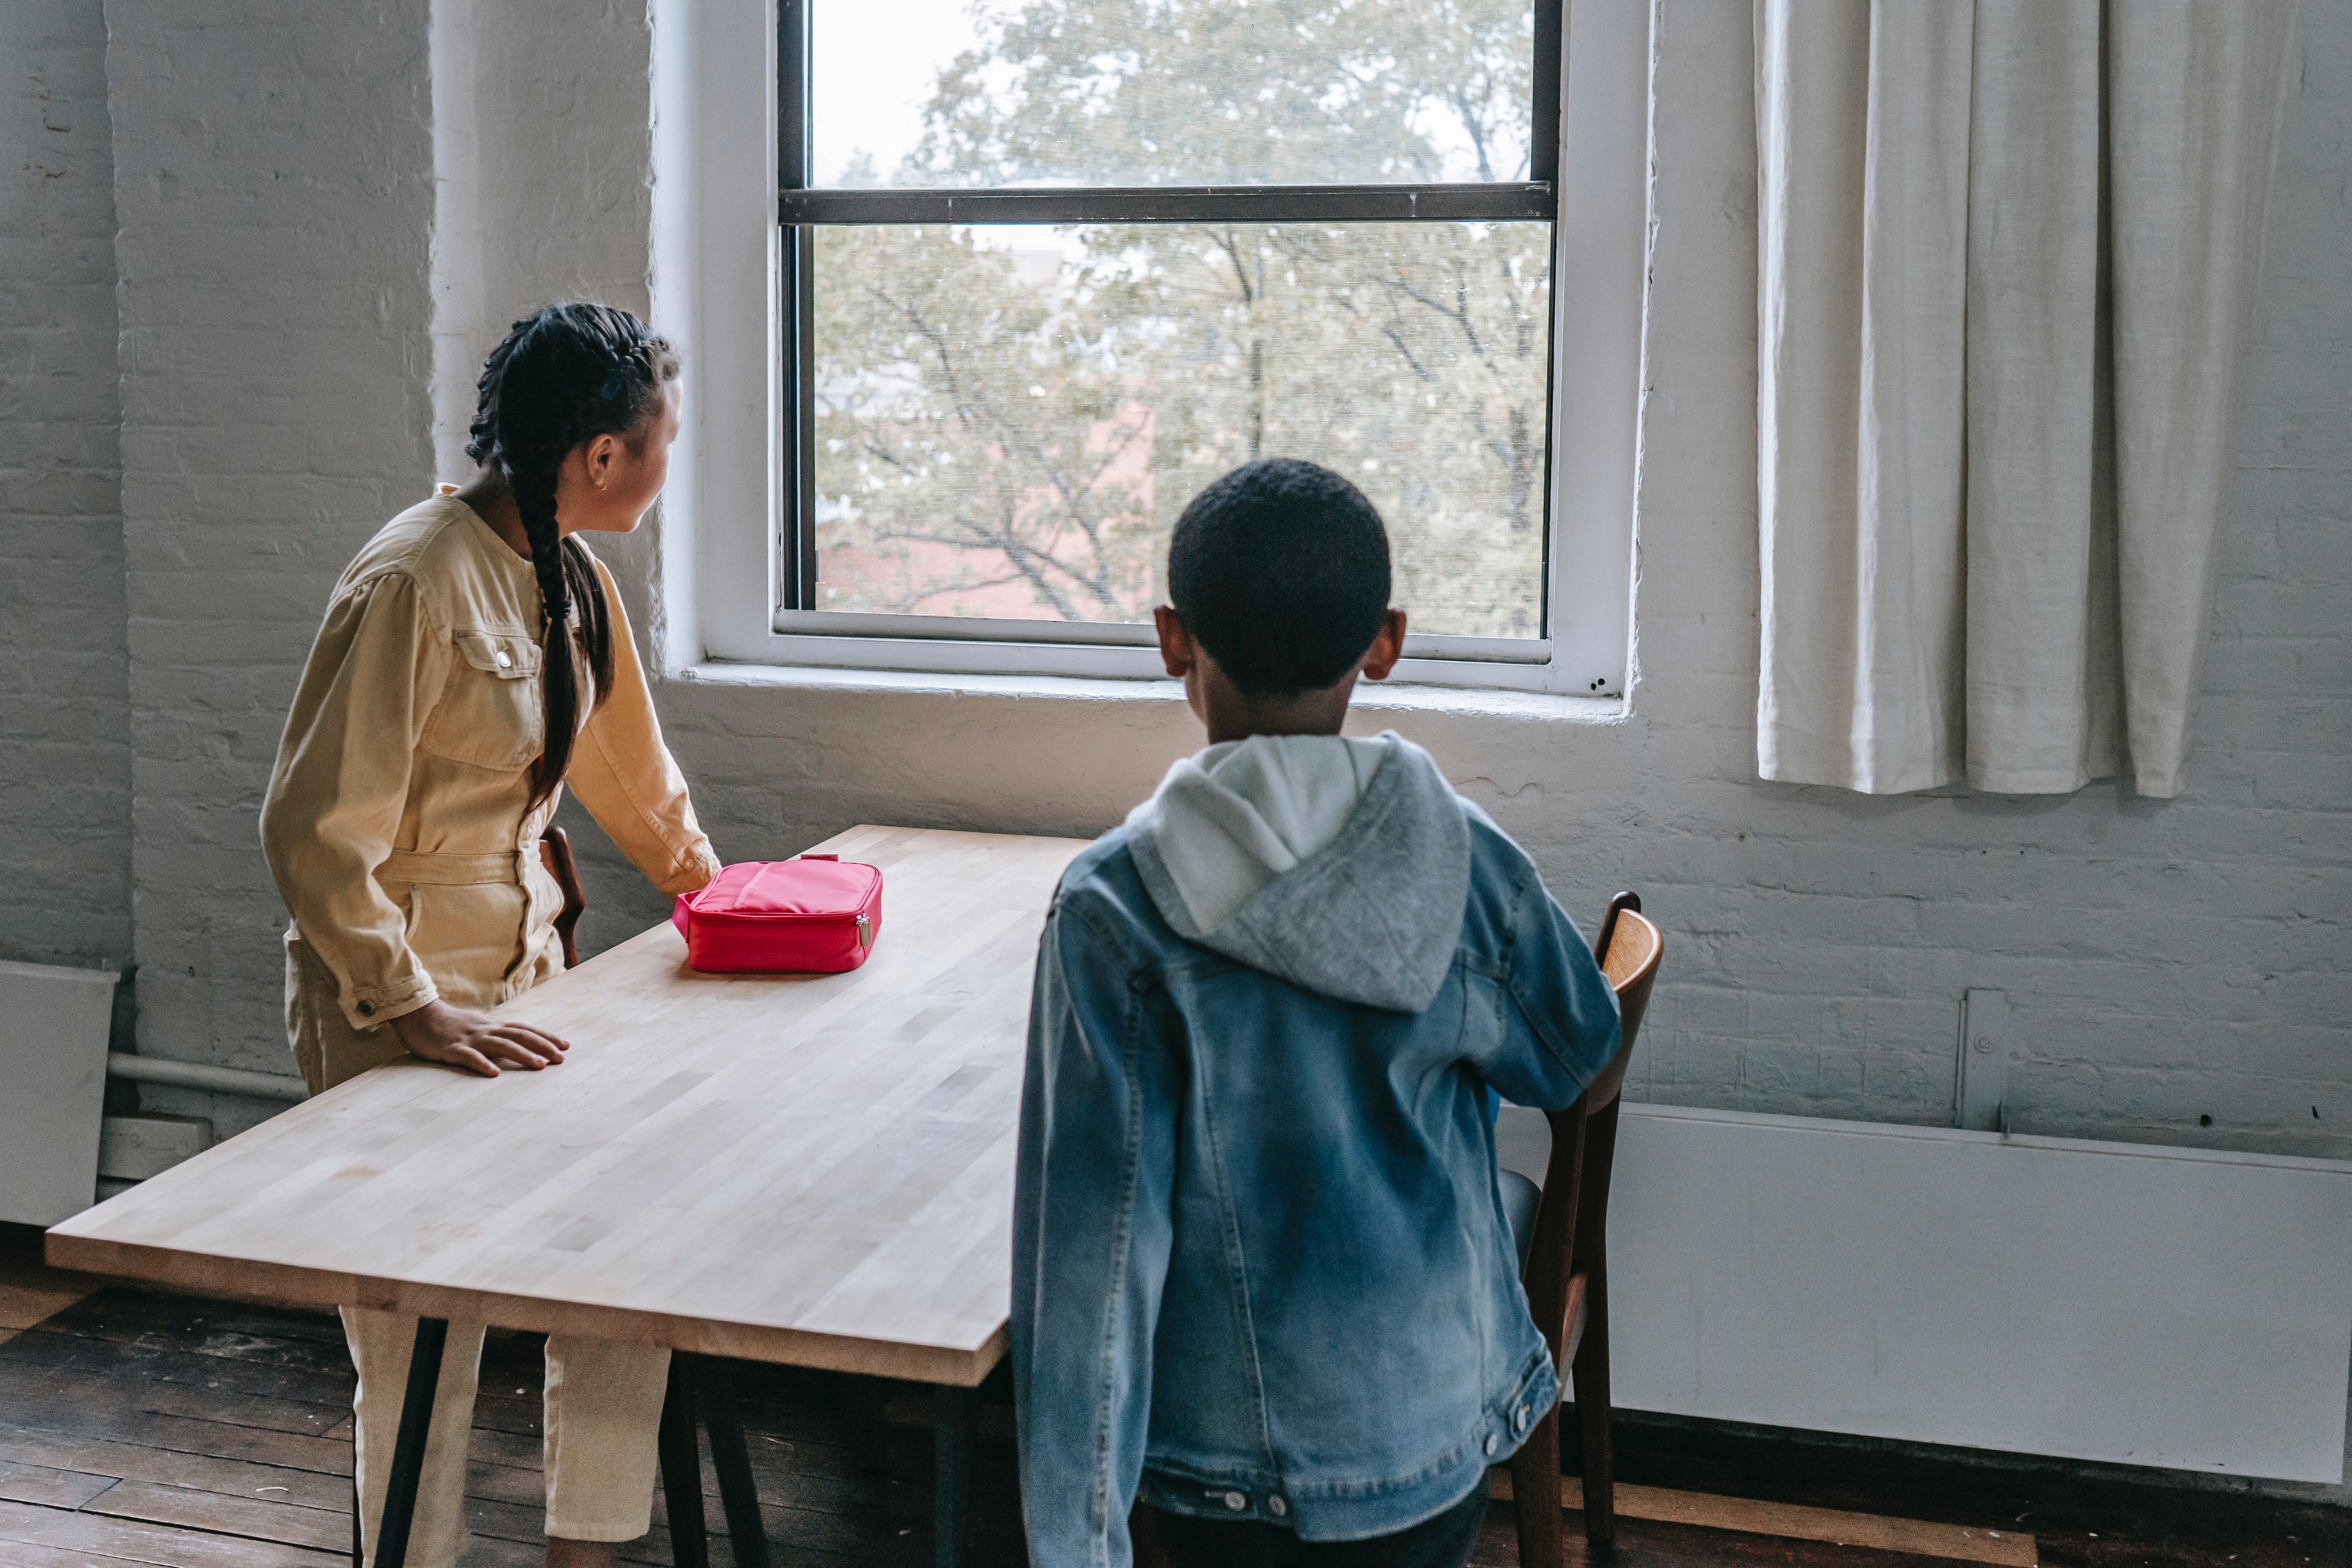 Two children looking out the window | Source: Pexels